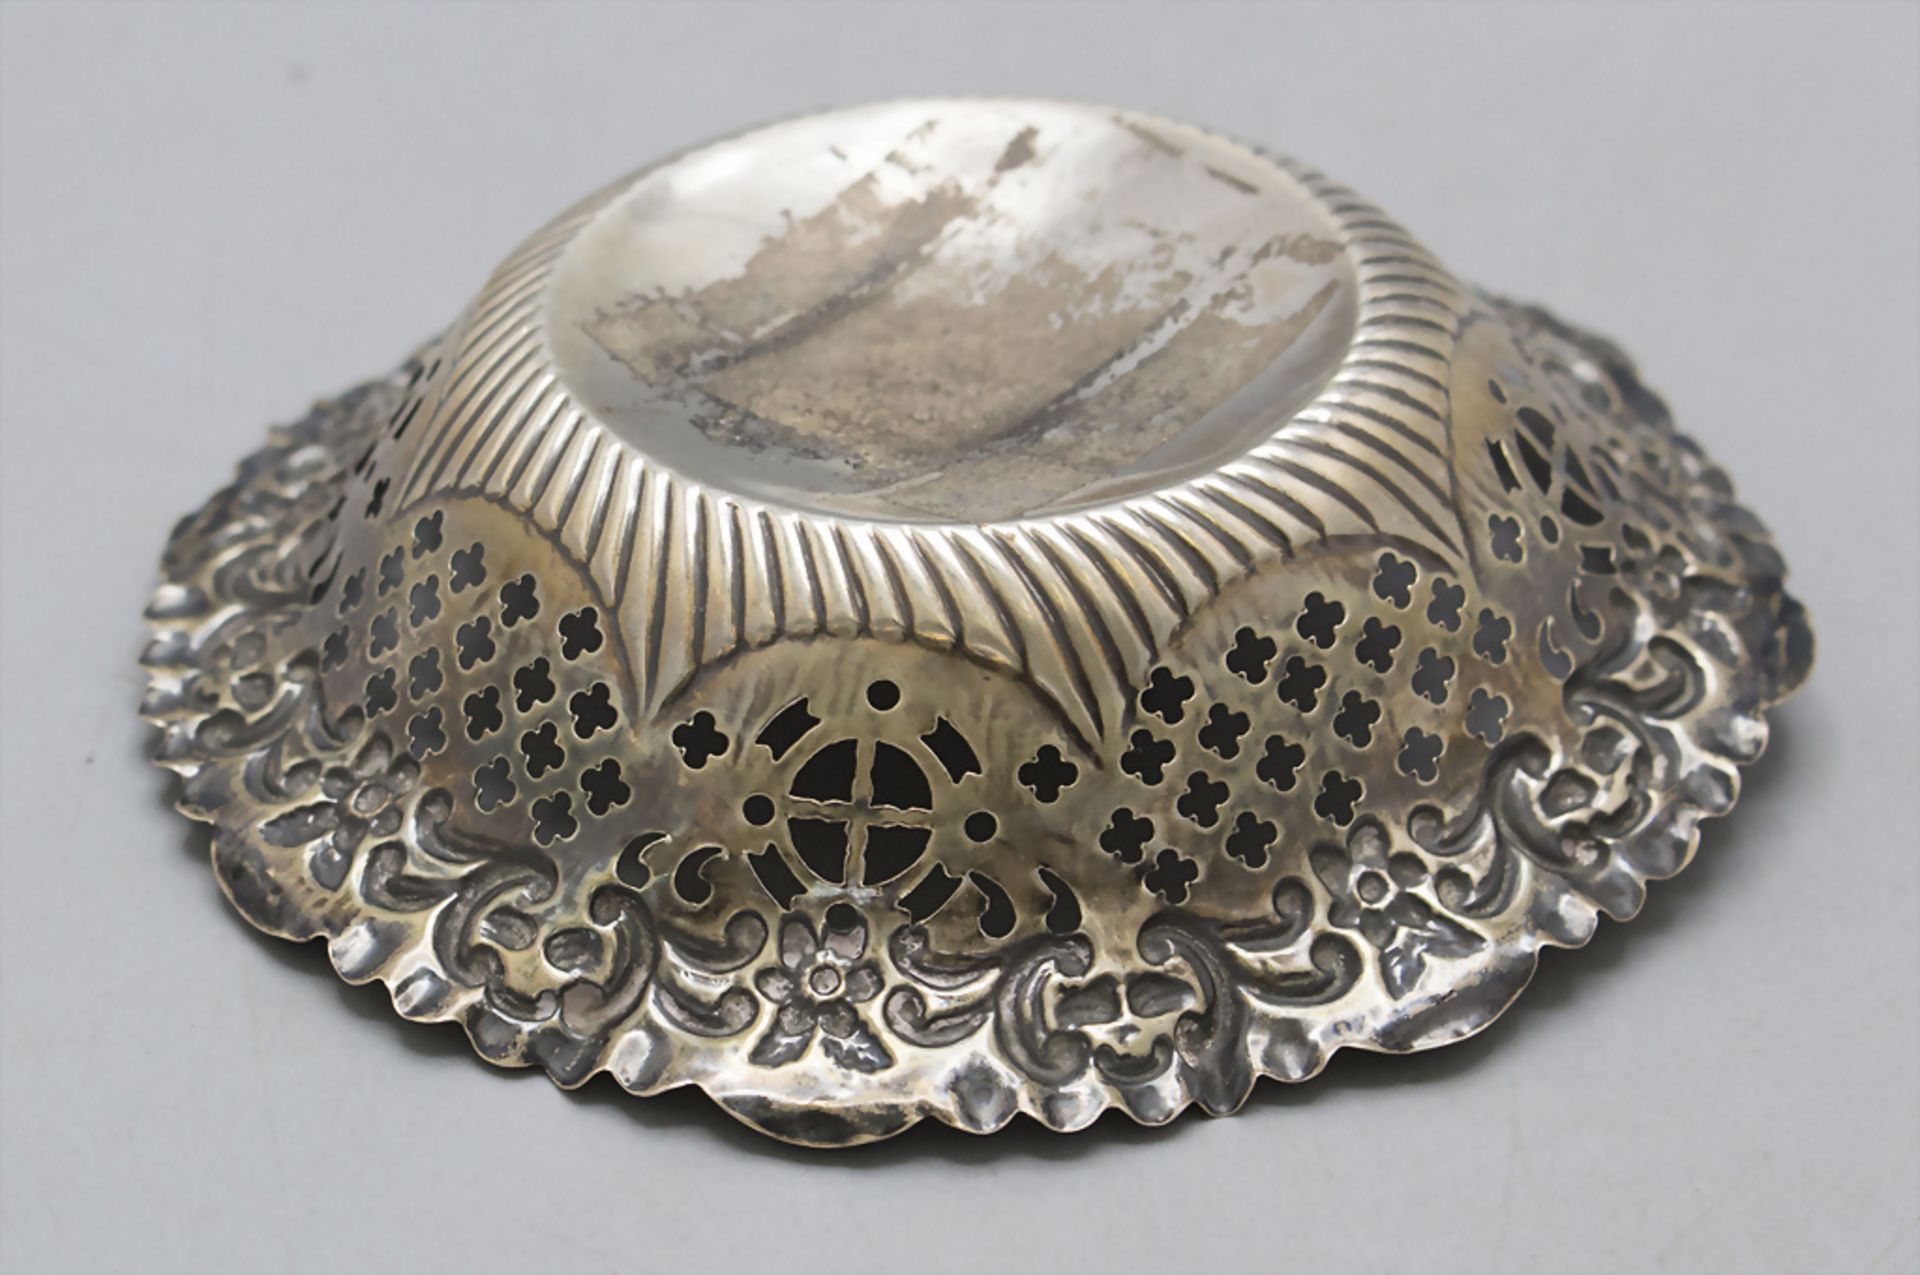 Kleine Korbschale / A small Sterling silver basket bowl, George Nathan & Ridley Hayes, ... - Image 3 of 4